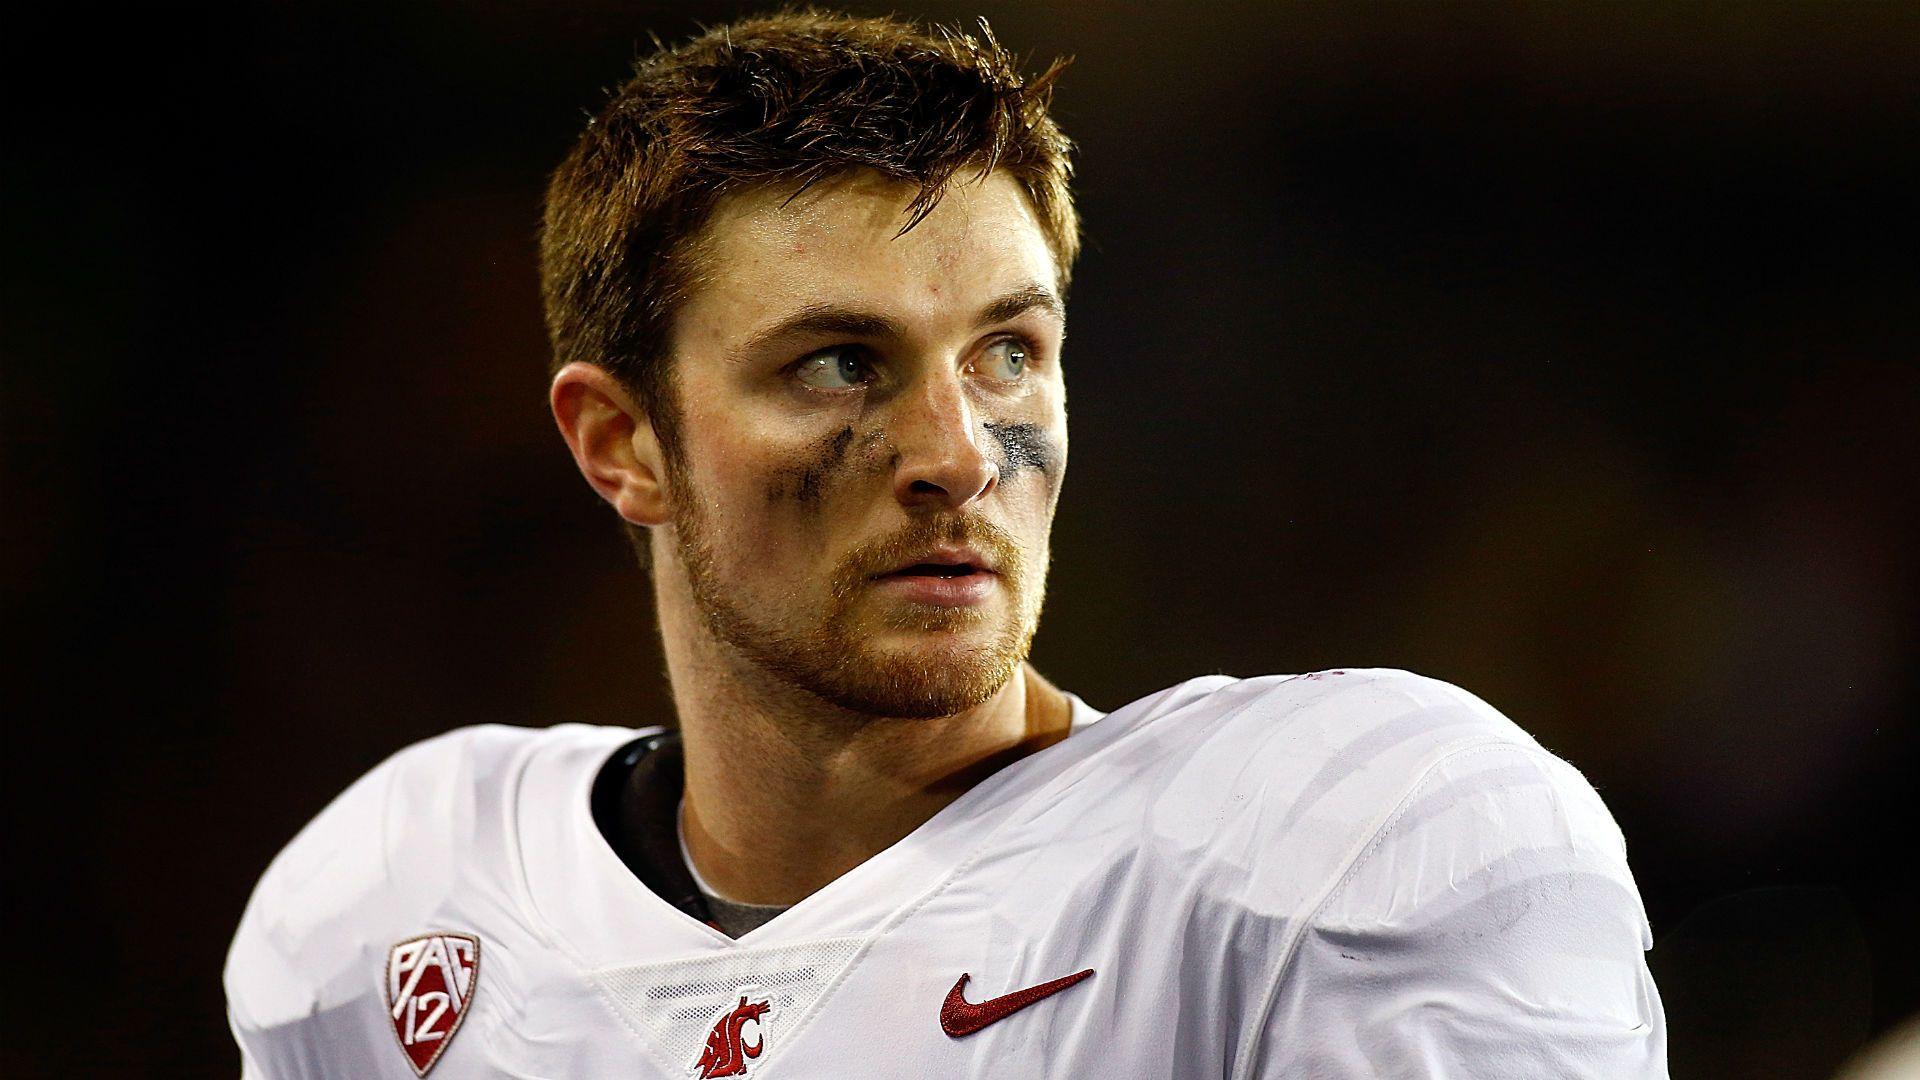 NFL Draft watch: Luke Falk's draft stock continues to rise